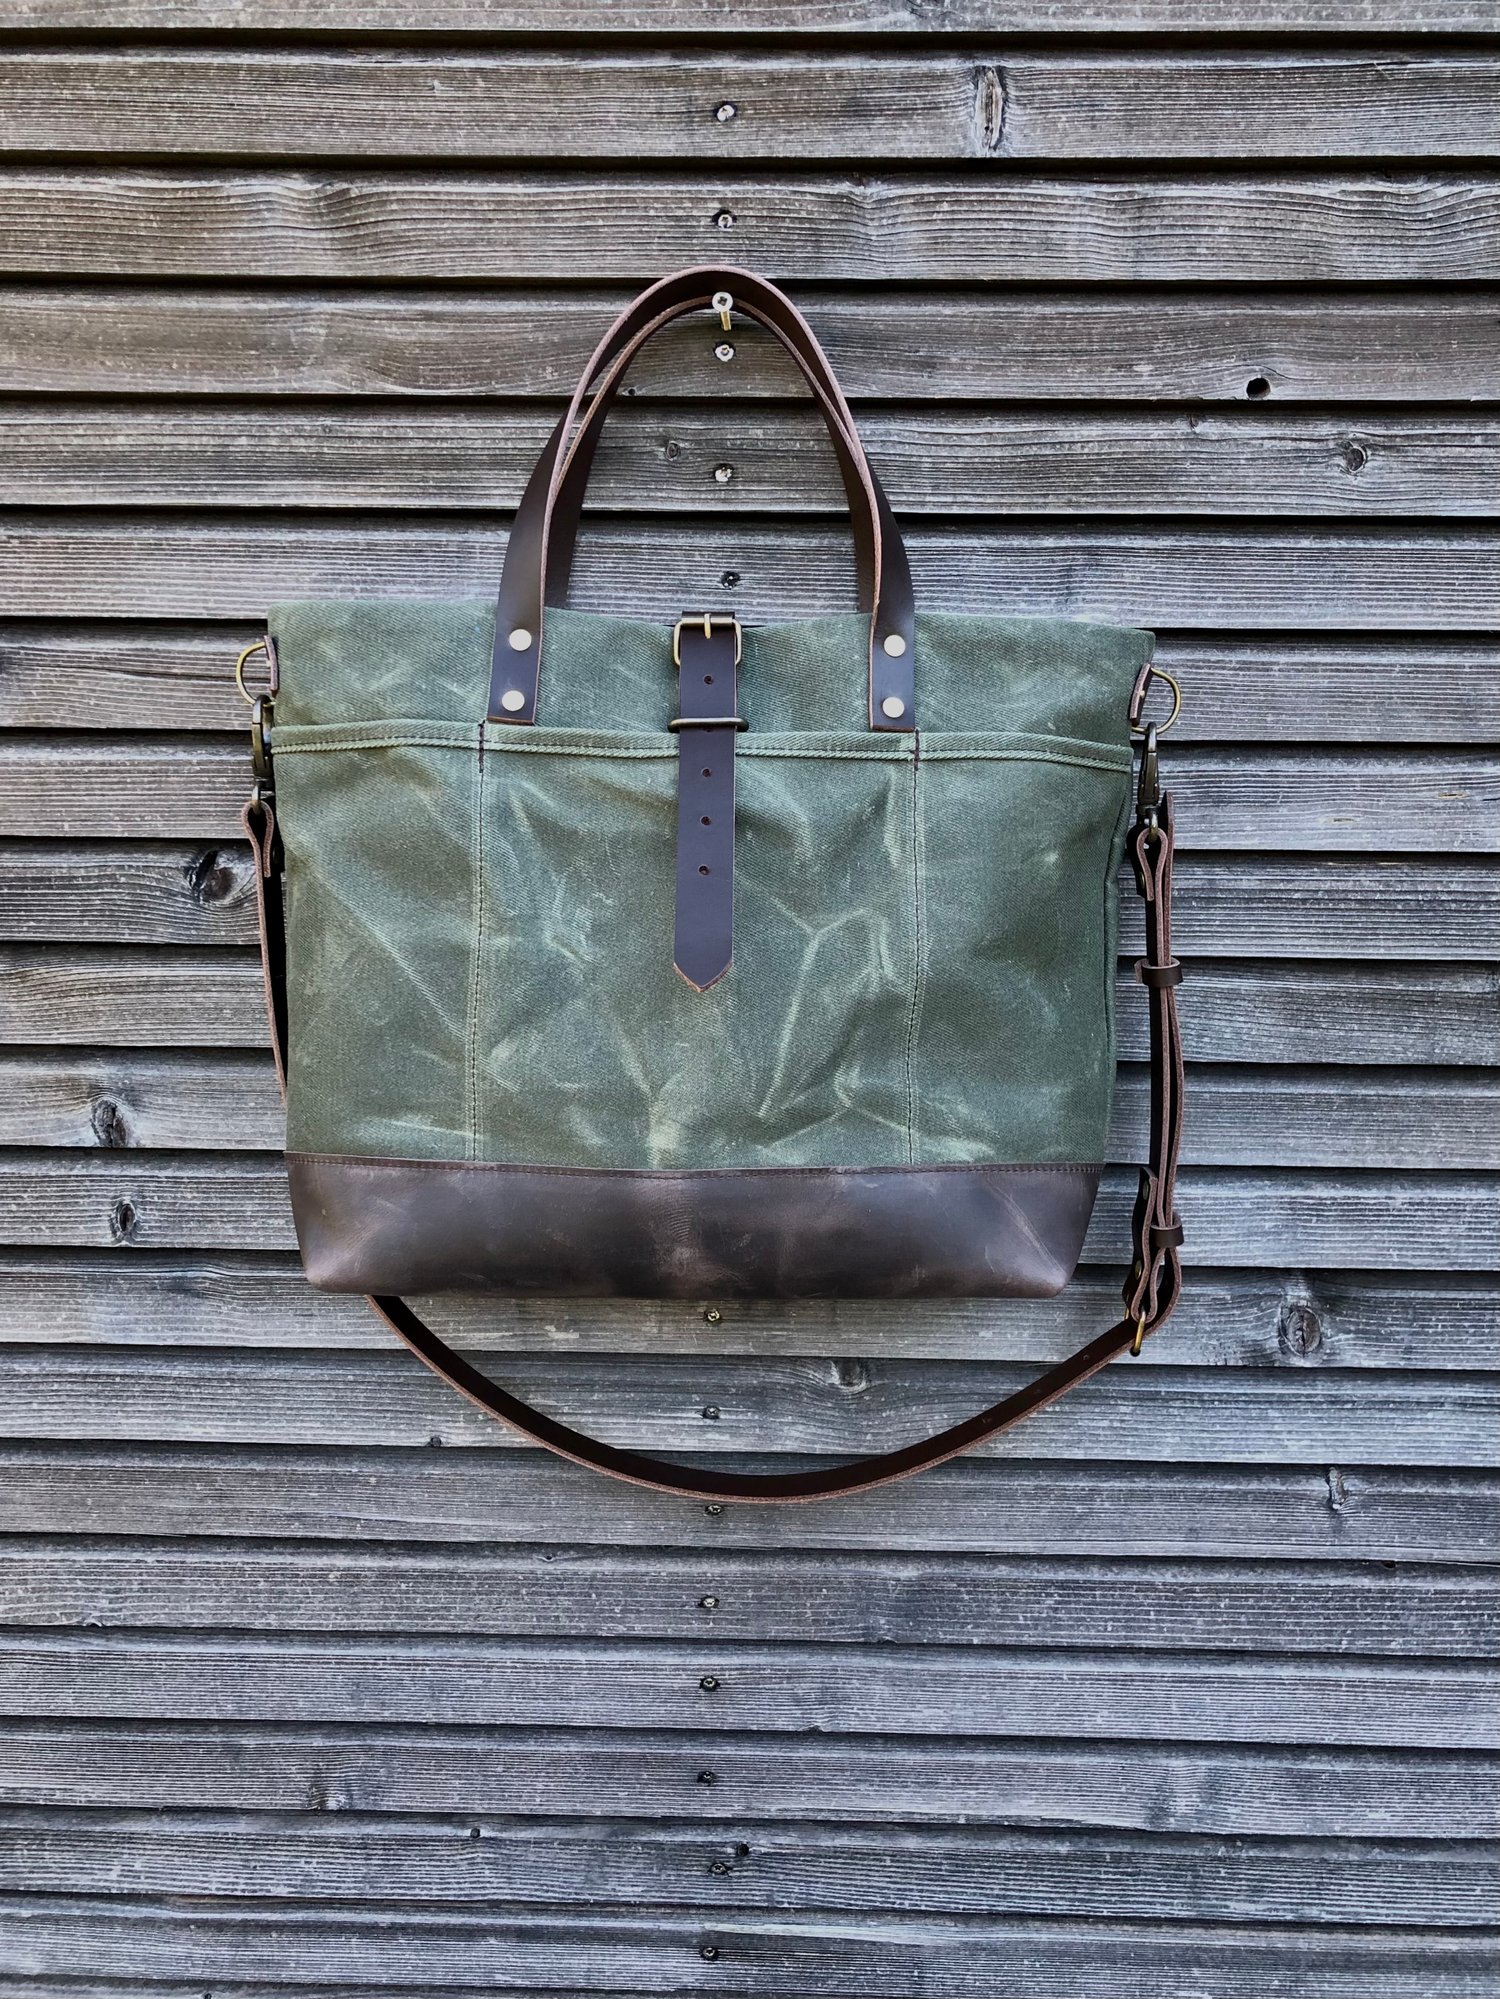 Carryall tote bag in olive green waxed filter twill with leather bottom ...